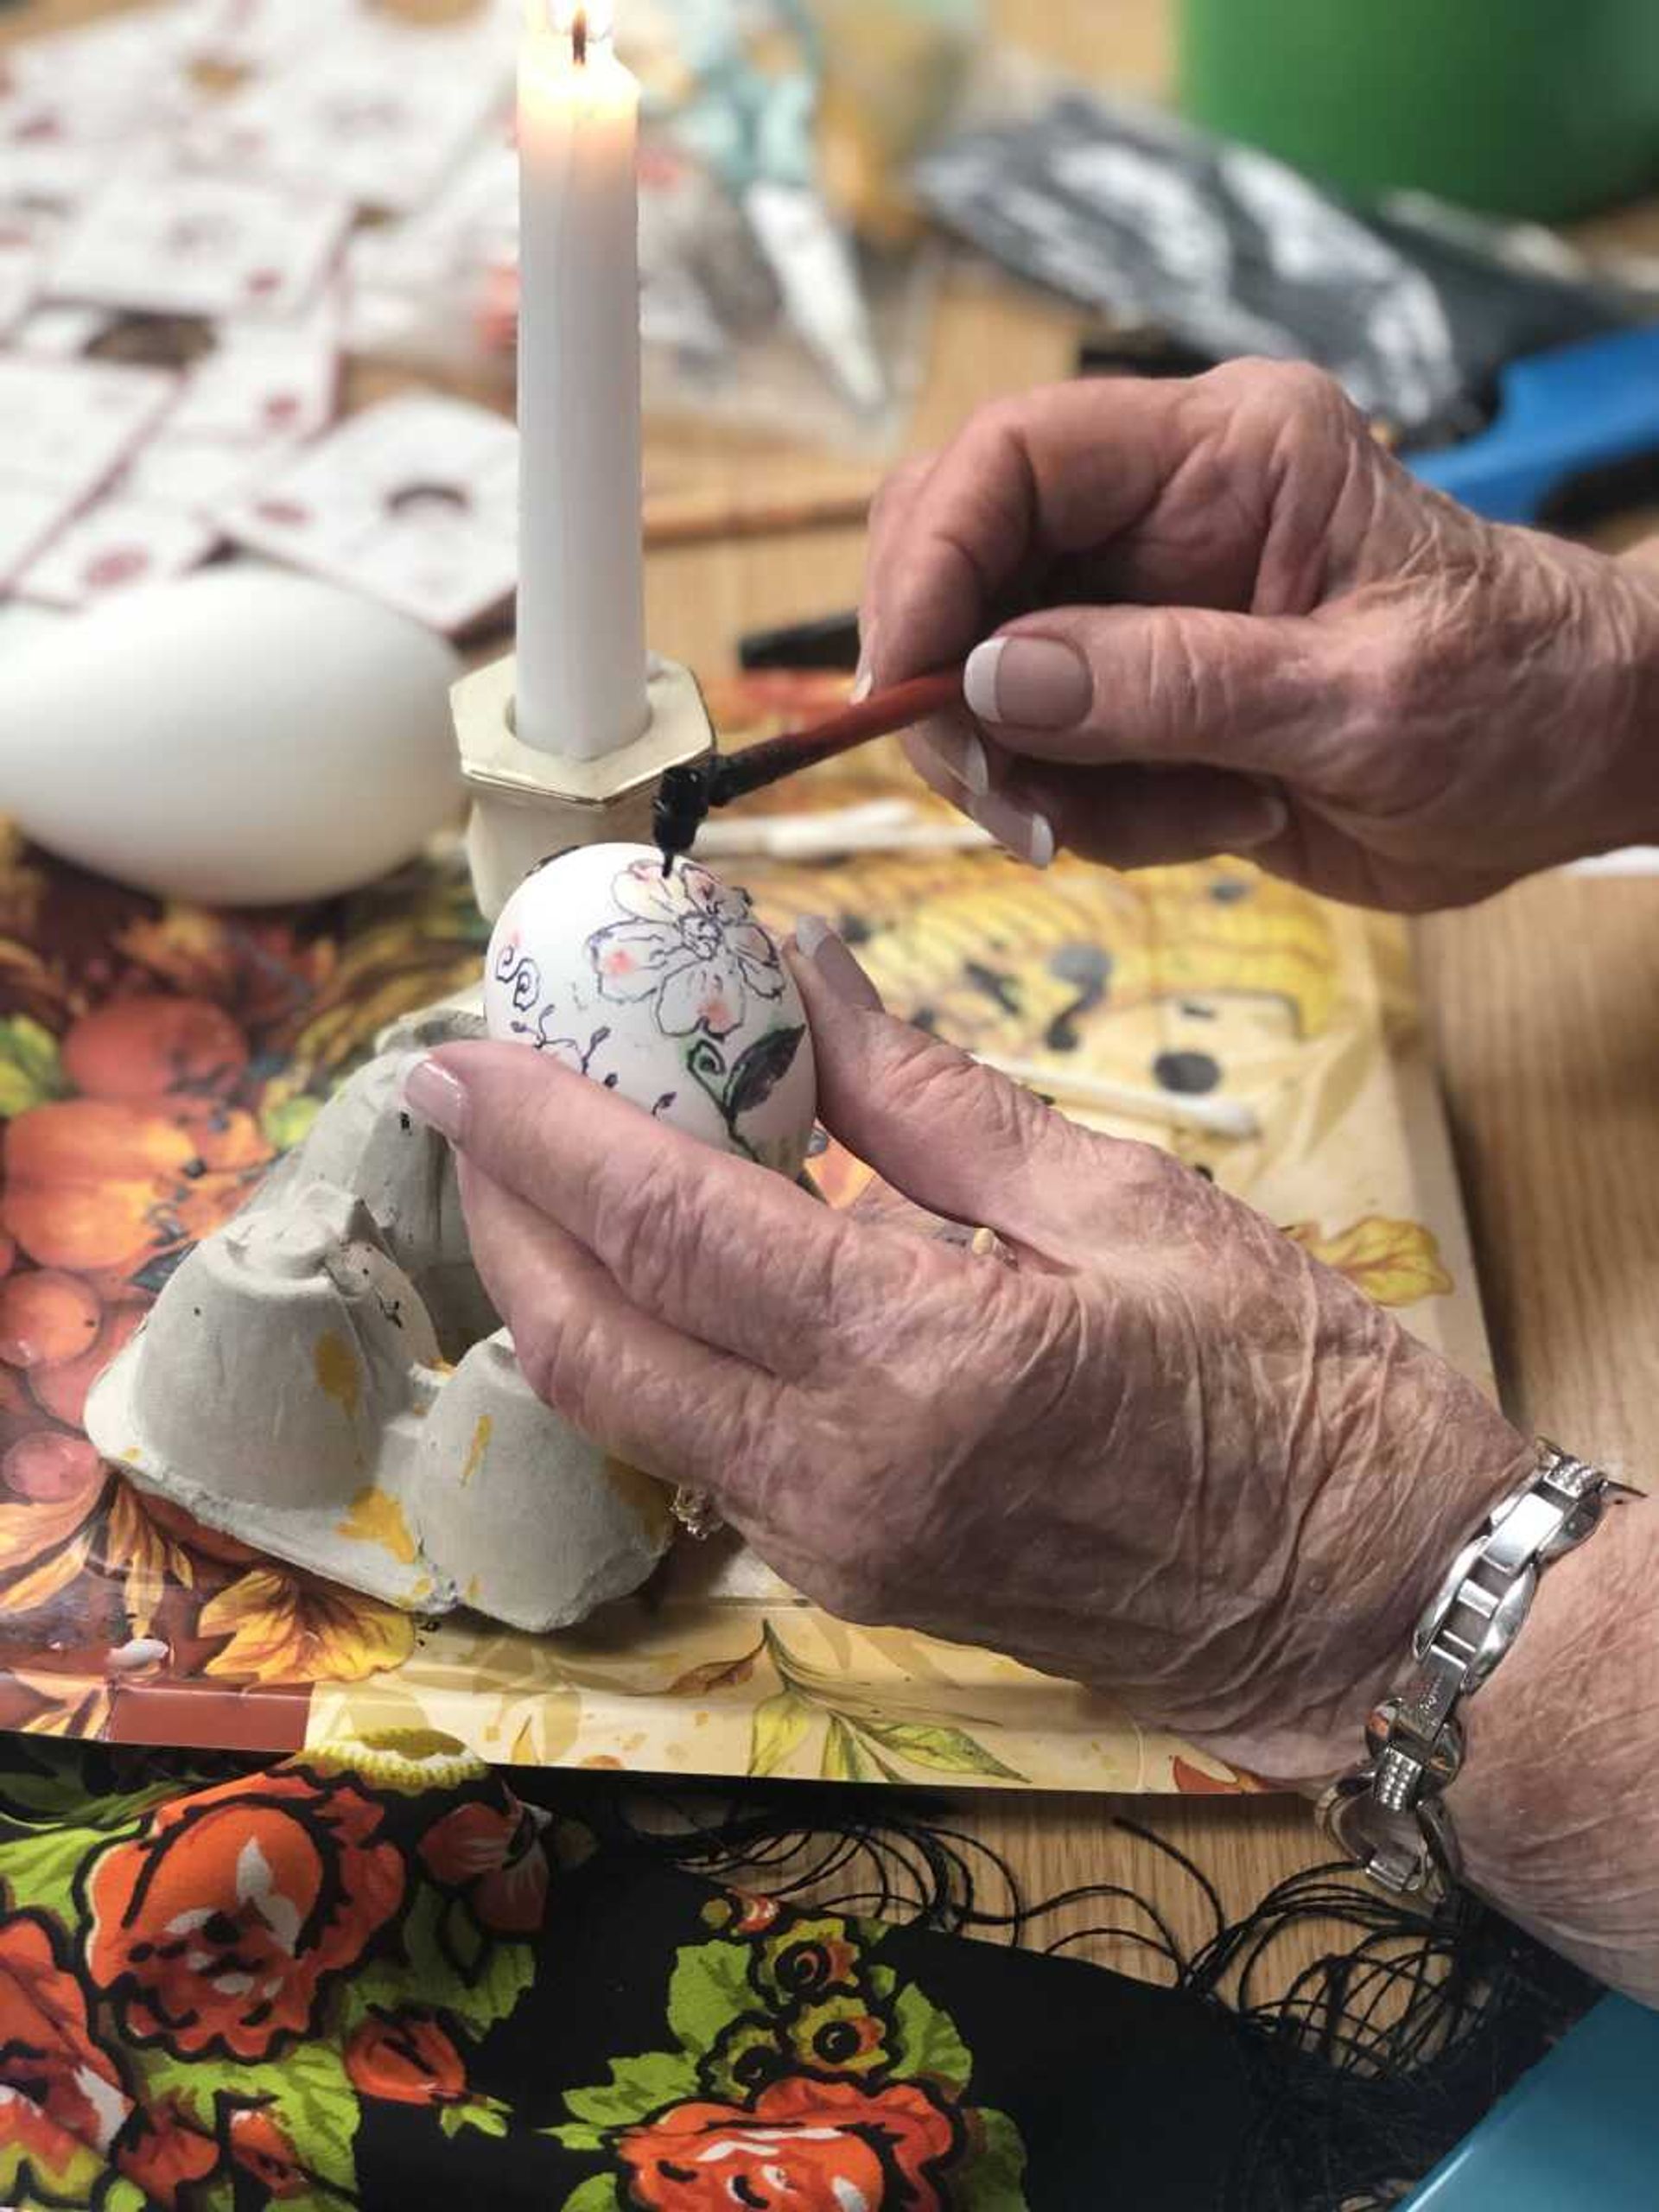 Former Southeast education professor Barb Duncan working on decorating an egg at the Ukrainian egg decorating class she taught on April 9 and 10 at the Crisp Museum on the River Campus.